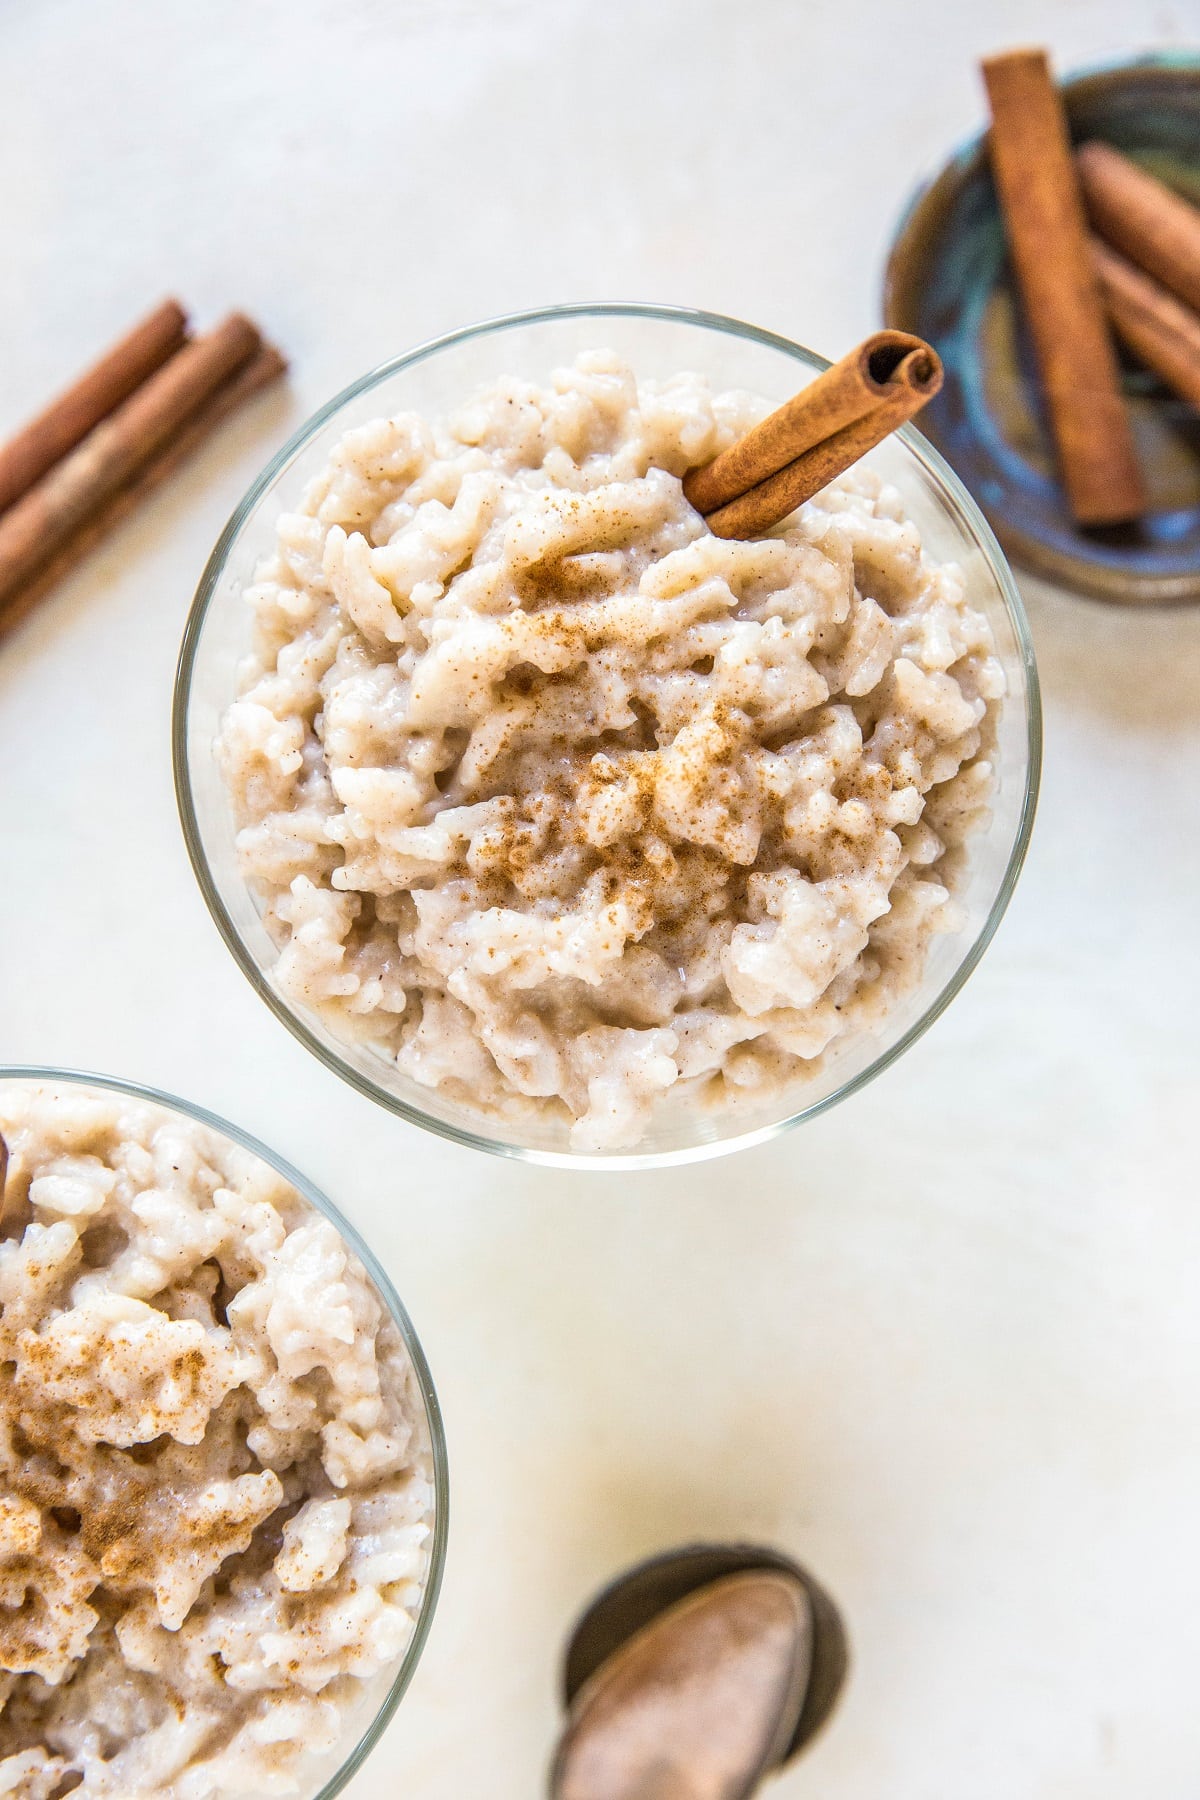 https://www.theroastedroot.net/wp-content/uploads/2020/05/instant-pot-rice-pudding-6.jpg